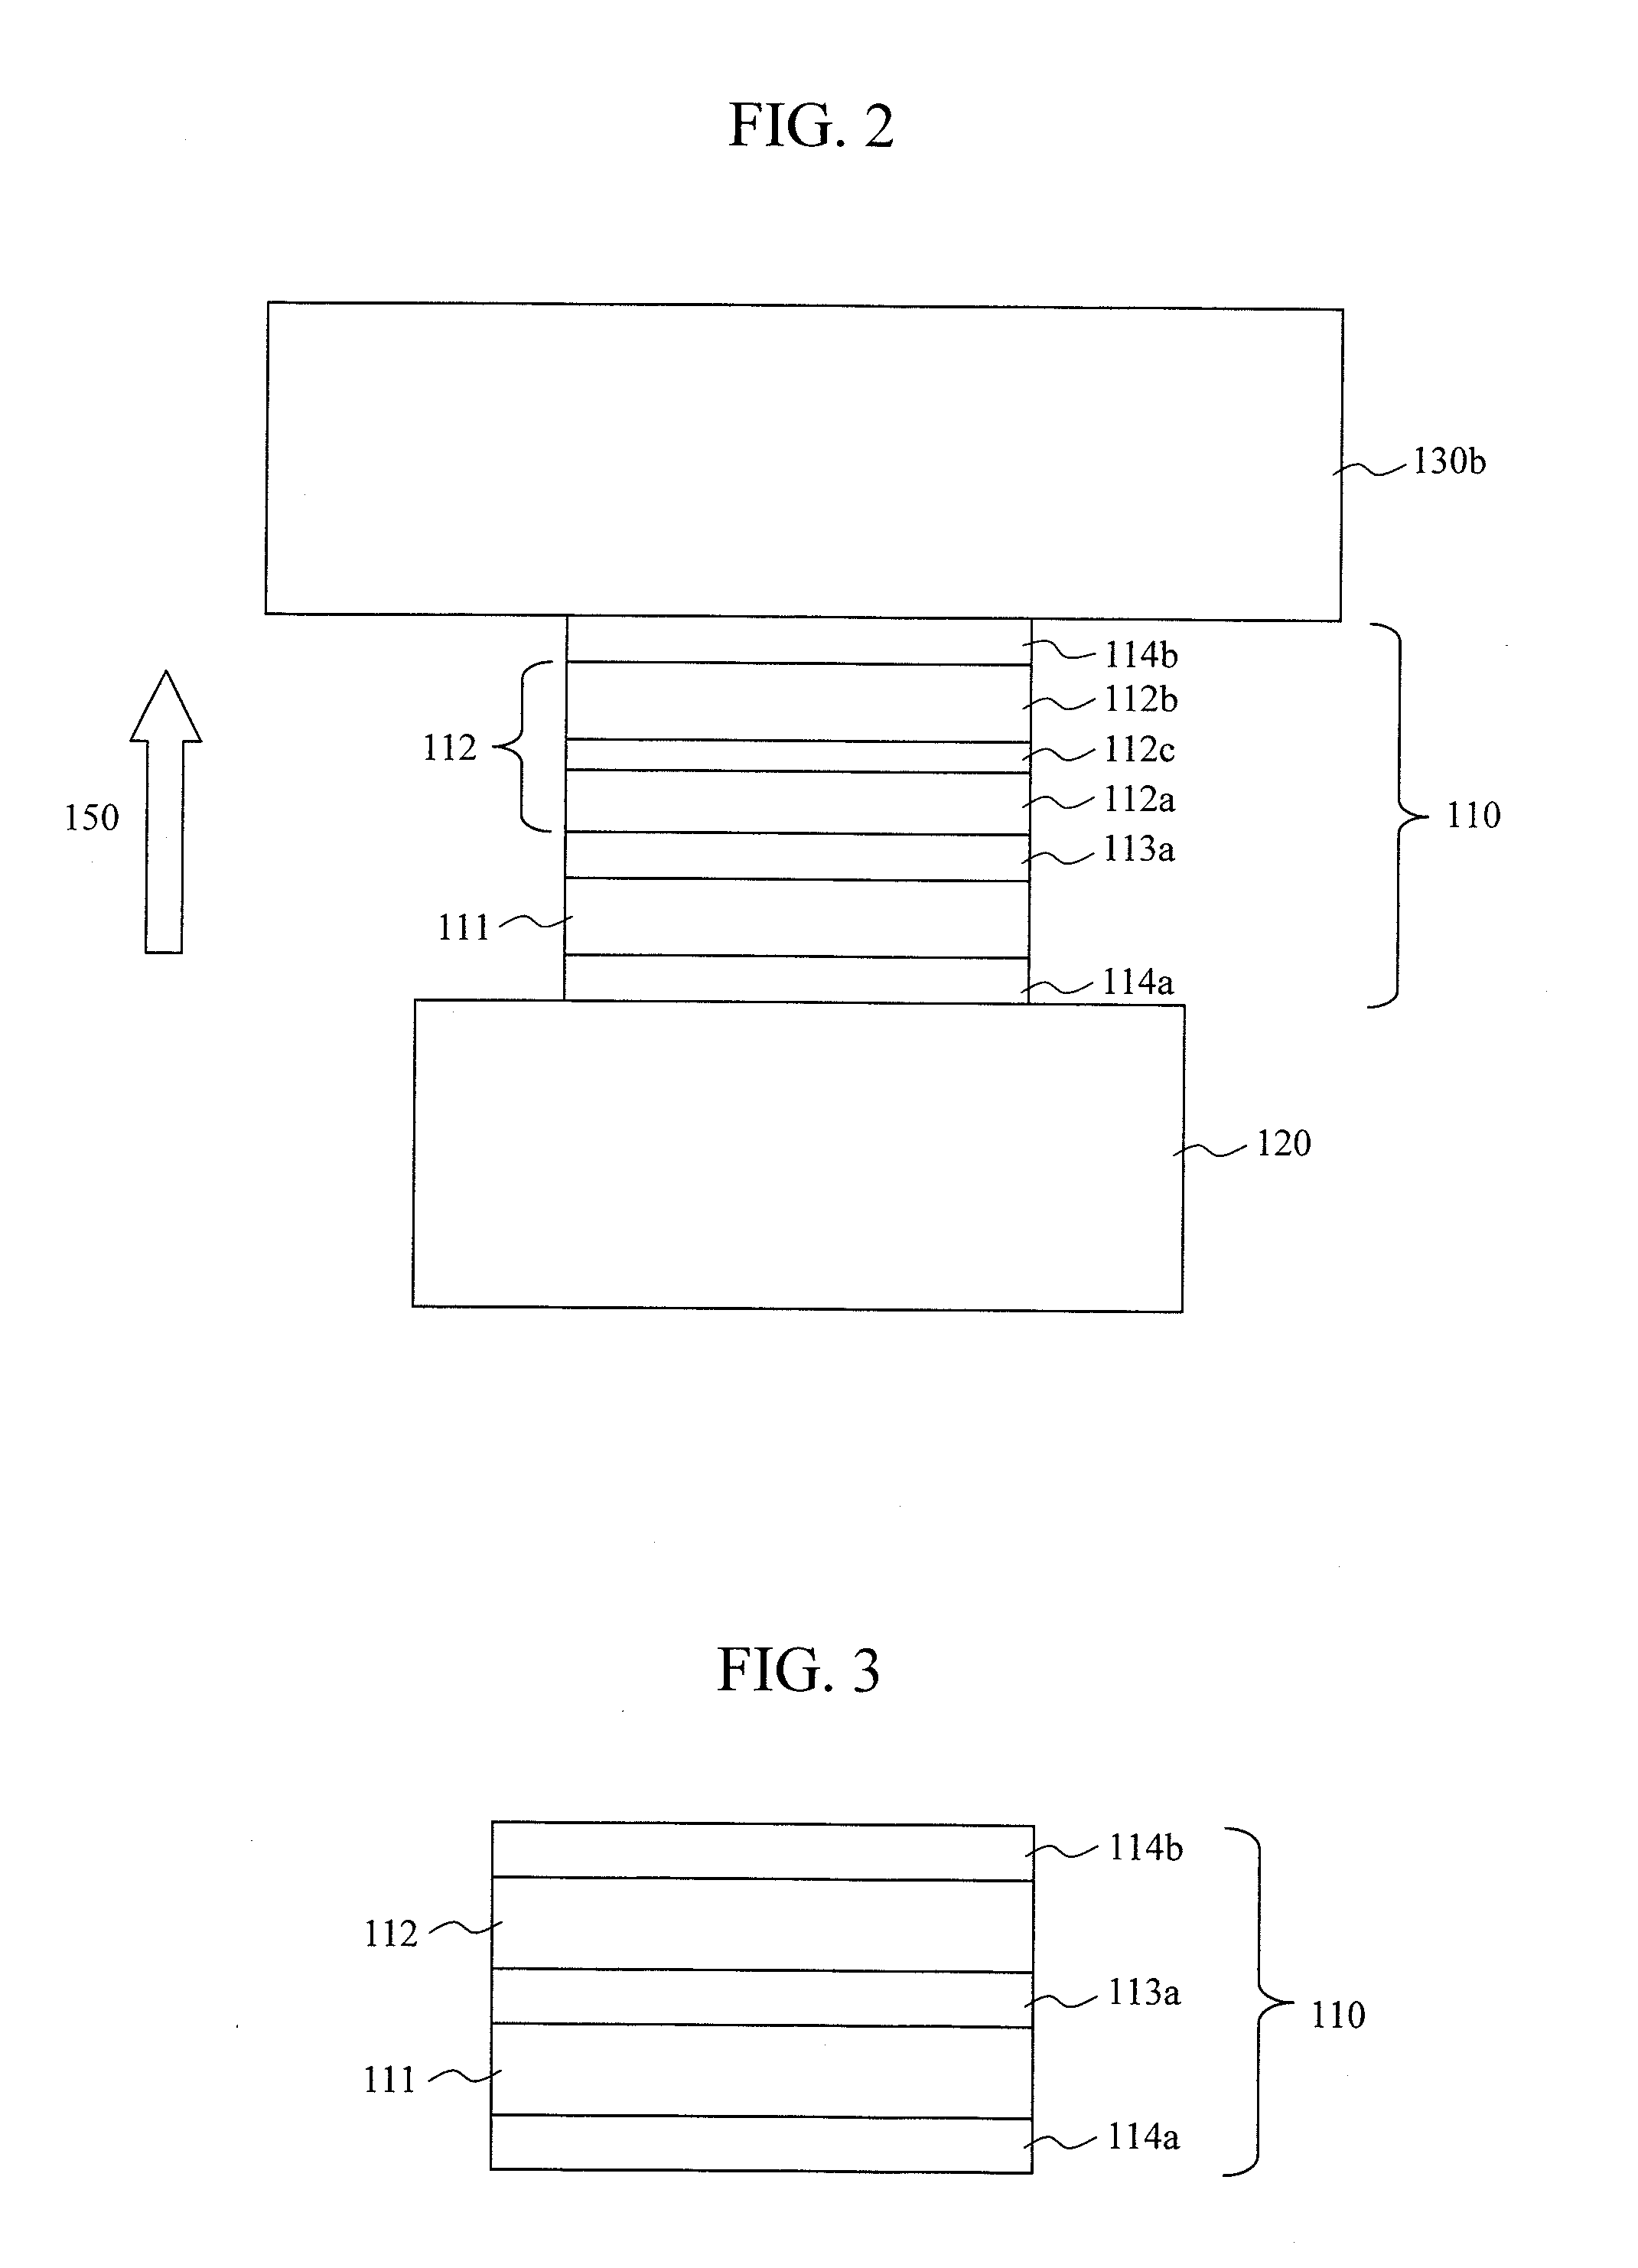 Magnetic recording head and magnetic recording/reproducing apparatus